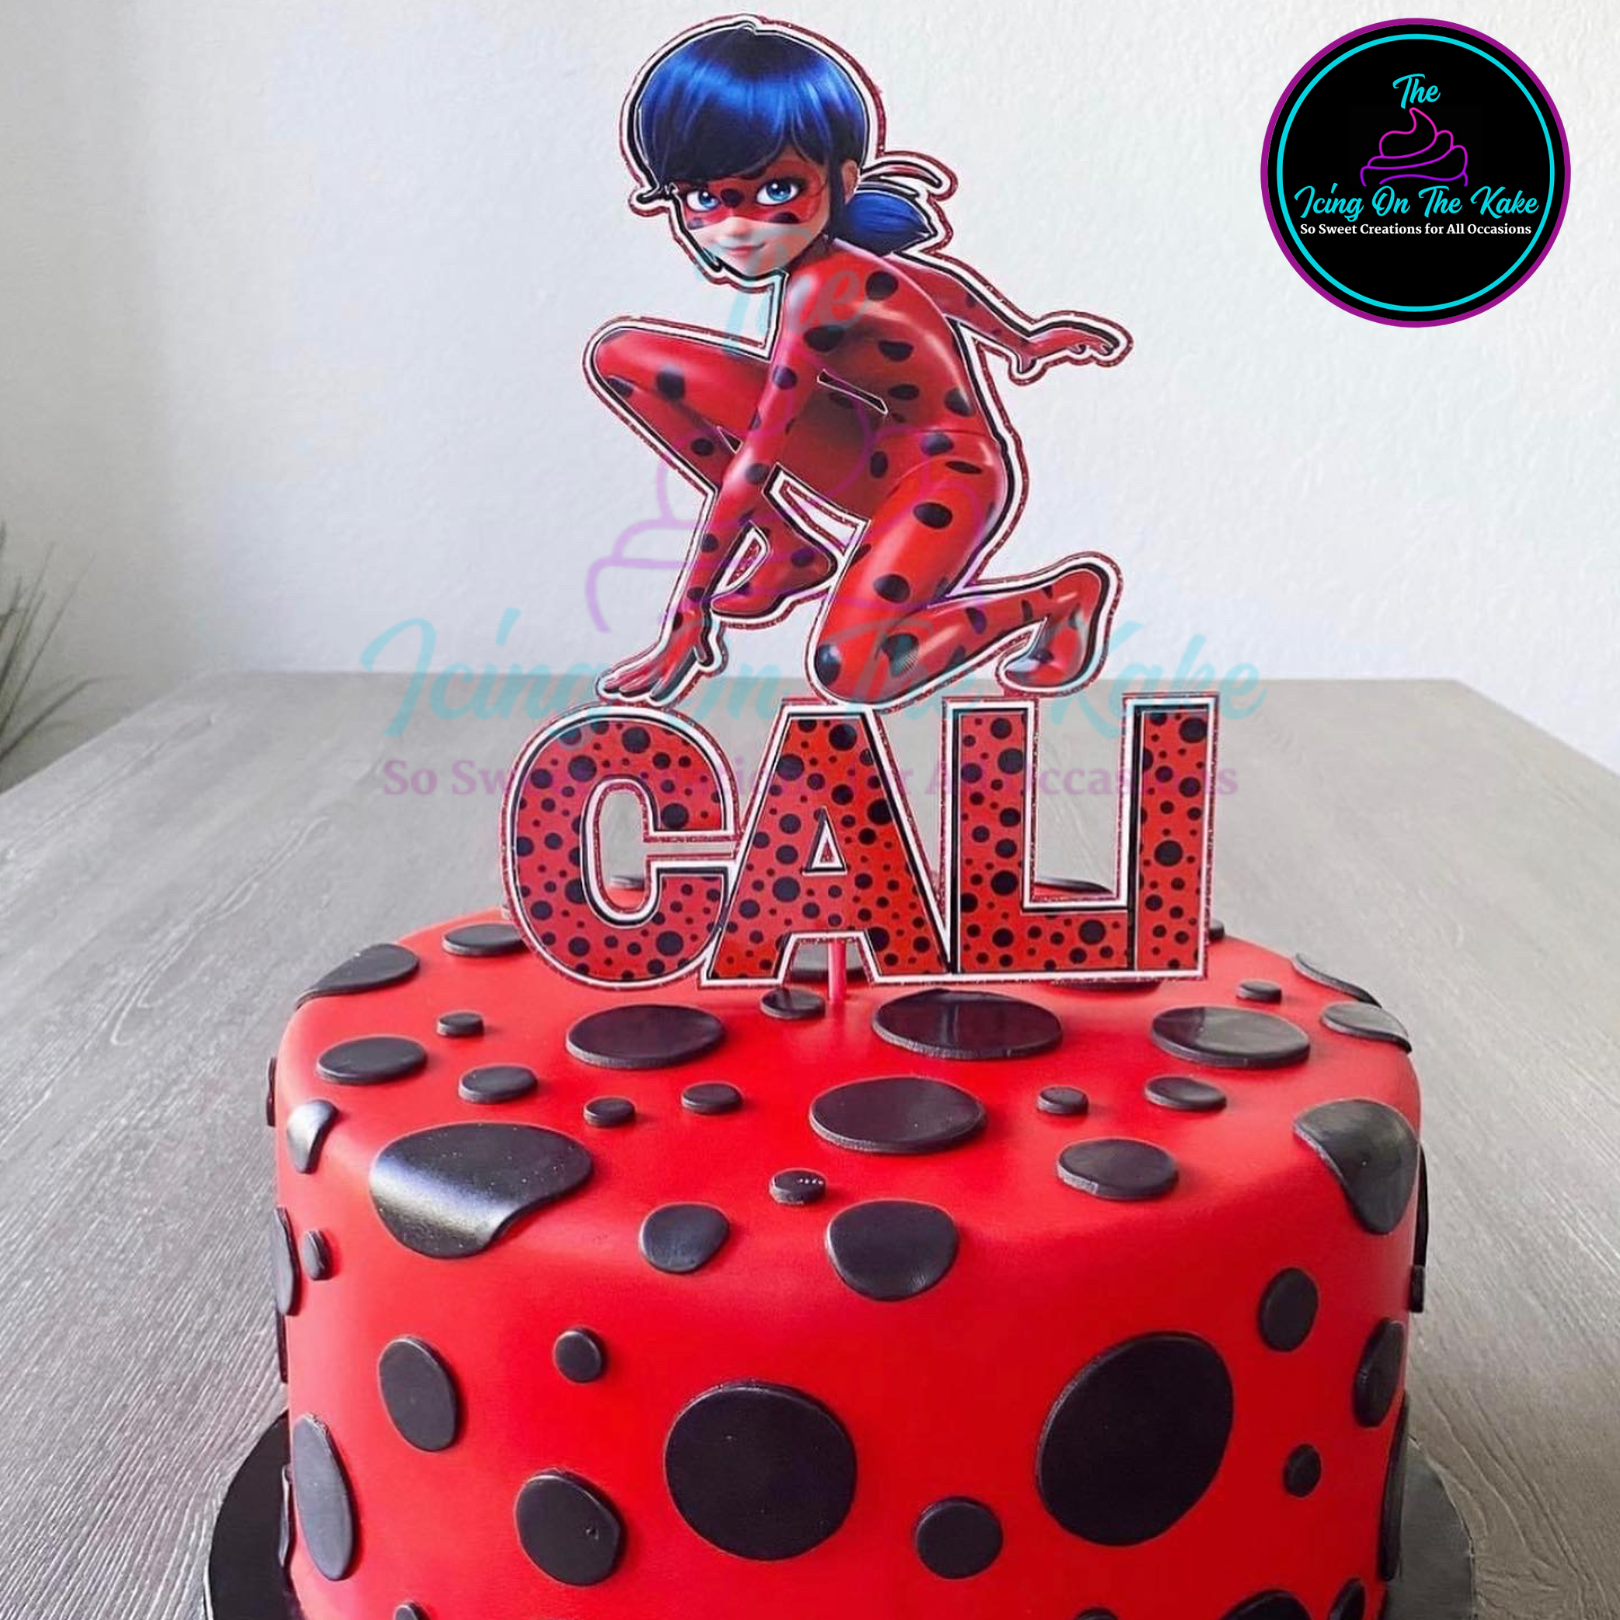 Ladybug Party Supplies in Party & Occasions 